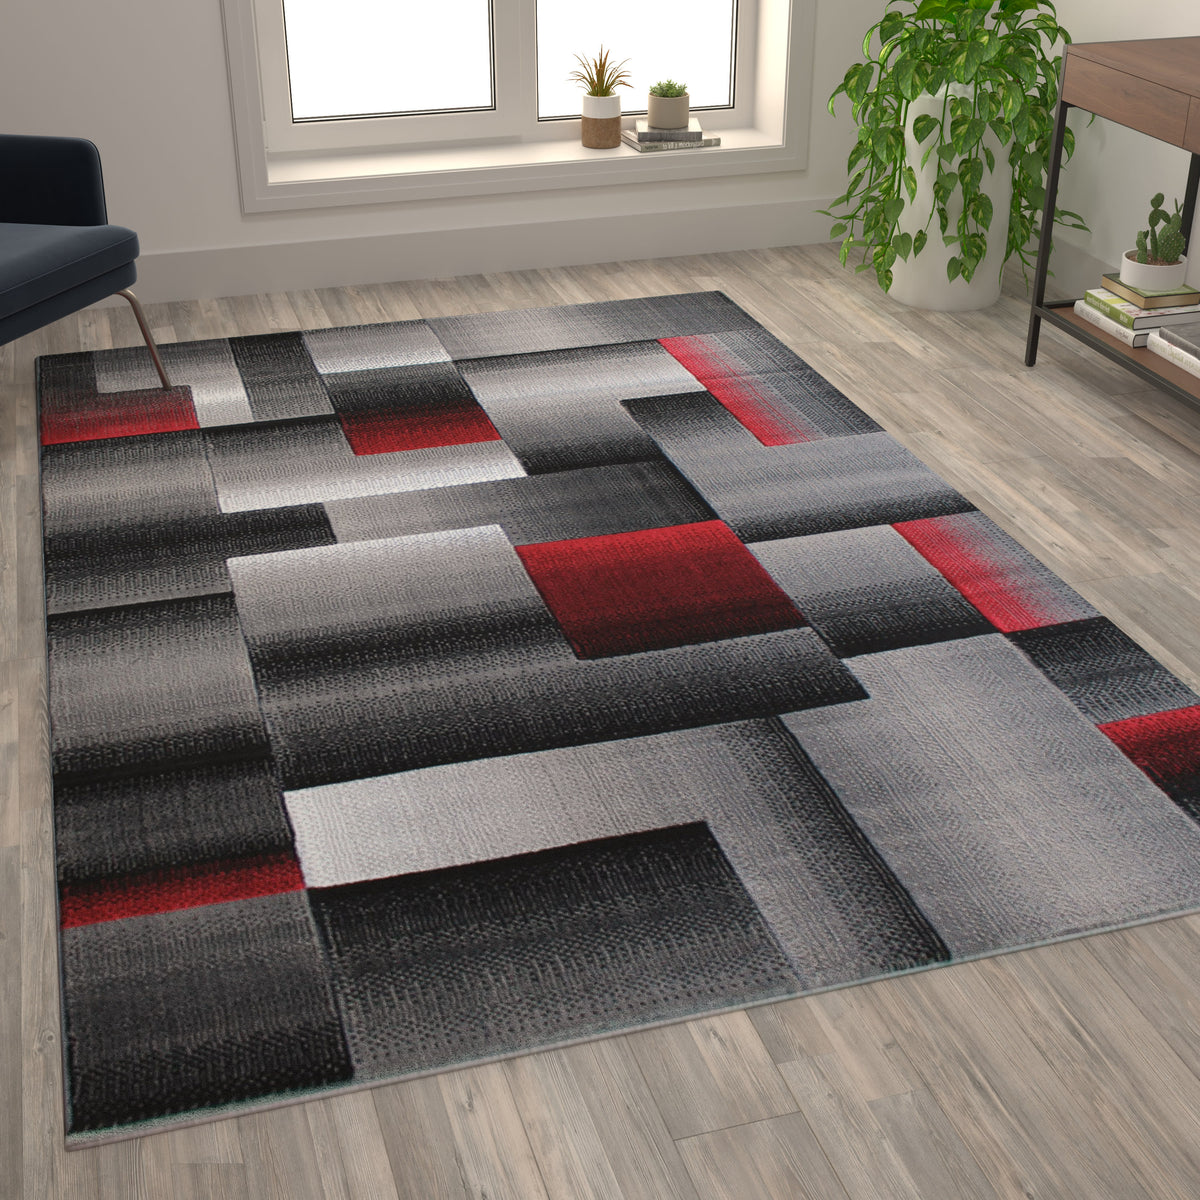 Red,6' x 9' |#| Modern Geometric Style Color Blocked Indoor Area Rug - Red - 6' x 9'